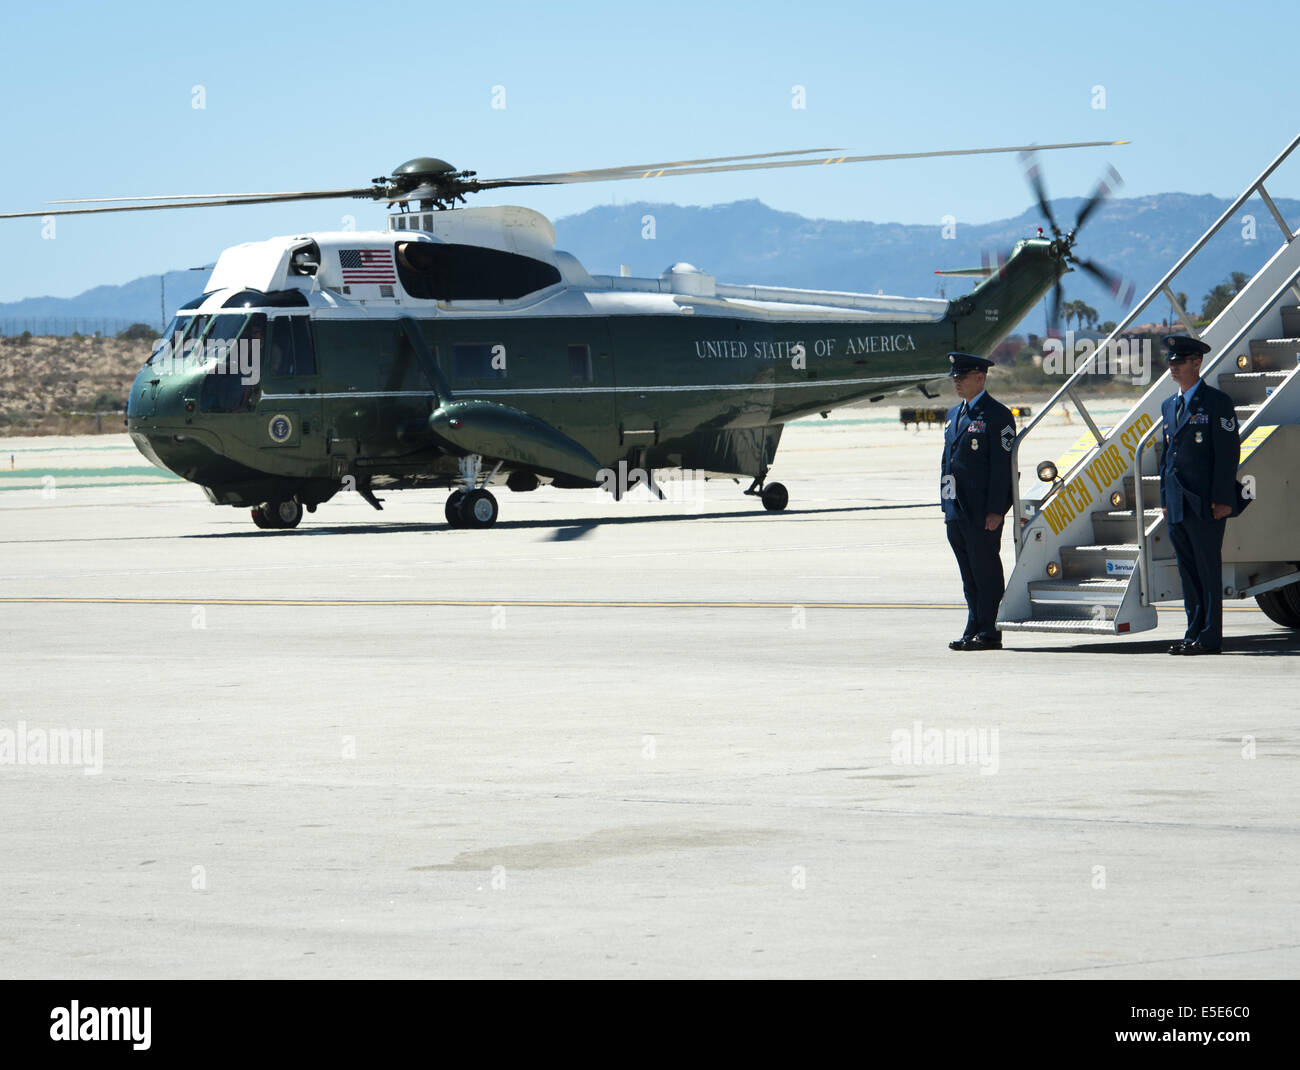 July 23, 2014 - Los Angeles, California, U.S - Marine One --- A Marine One Escort warms up along side Air Force One after the arrival of President Obama at LAX on Wednesday July 23, 2014. Sikorsky's SH-3 Sea King helicopter has been in use by the US Marine Corps' HMX-1 squadron as the first choice for Marine One since not long after it was placed in service by the US Navy in 1961.  The familiar metallic green with white top Sea King is transported, along with the presidential limousine and other large equipment via a set of several C-17 Boeing Globemaster transport aircraft operated by the US  Stock Photo